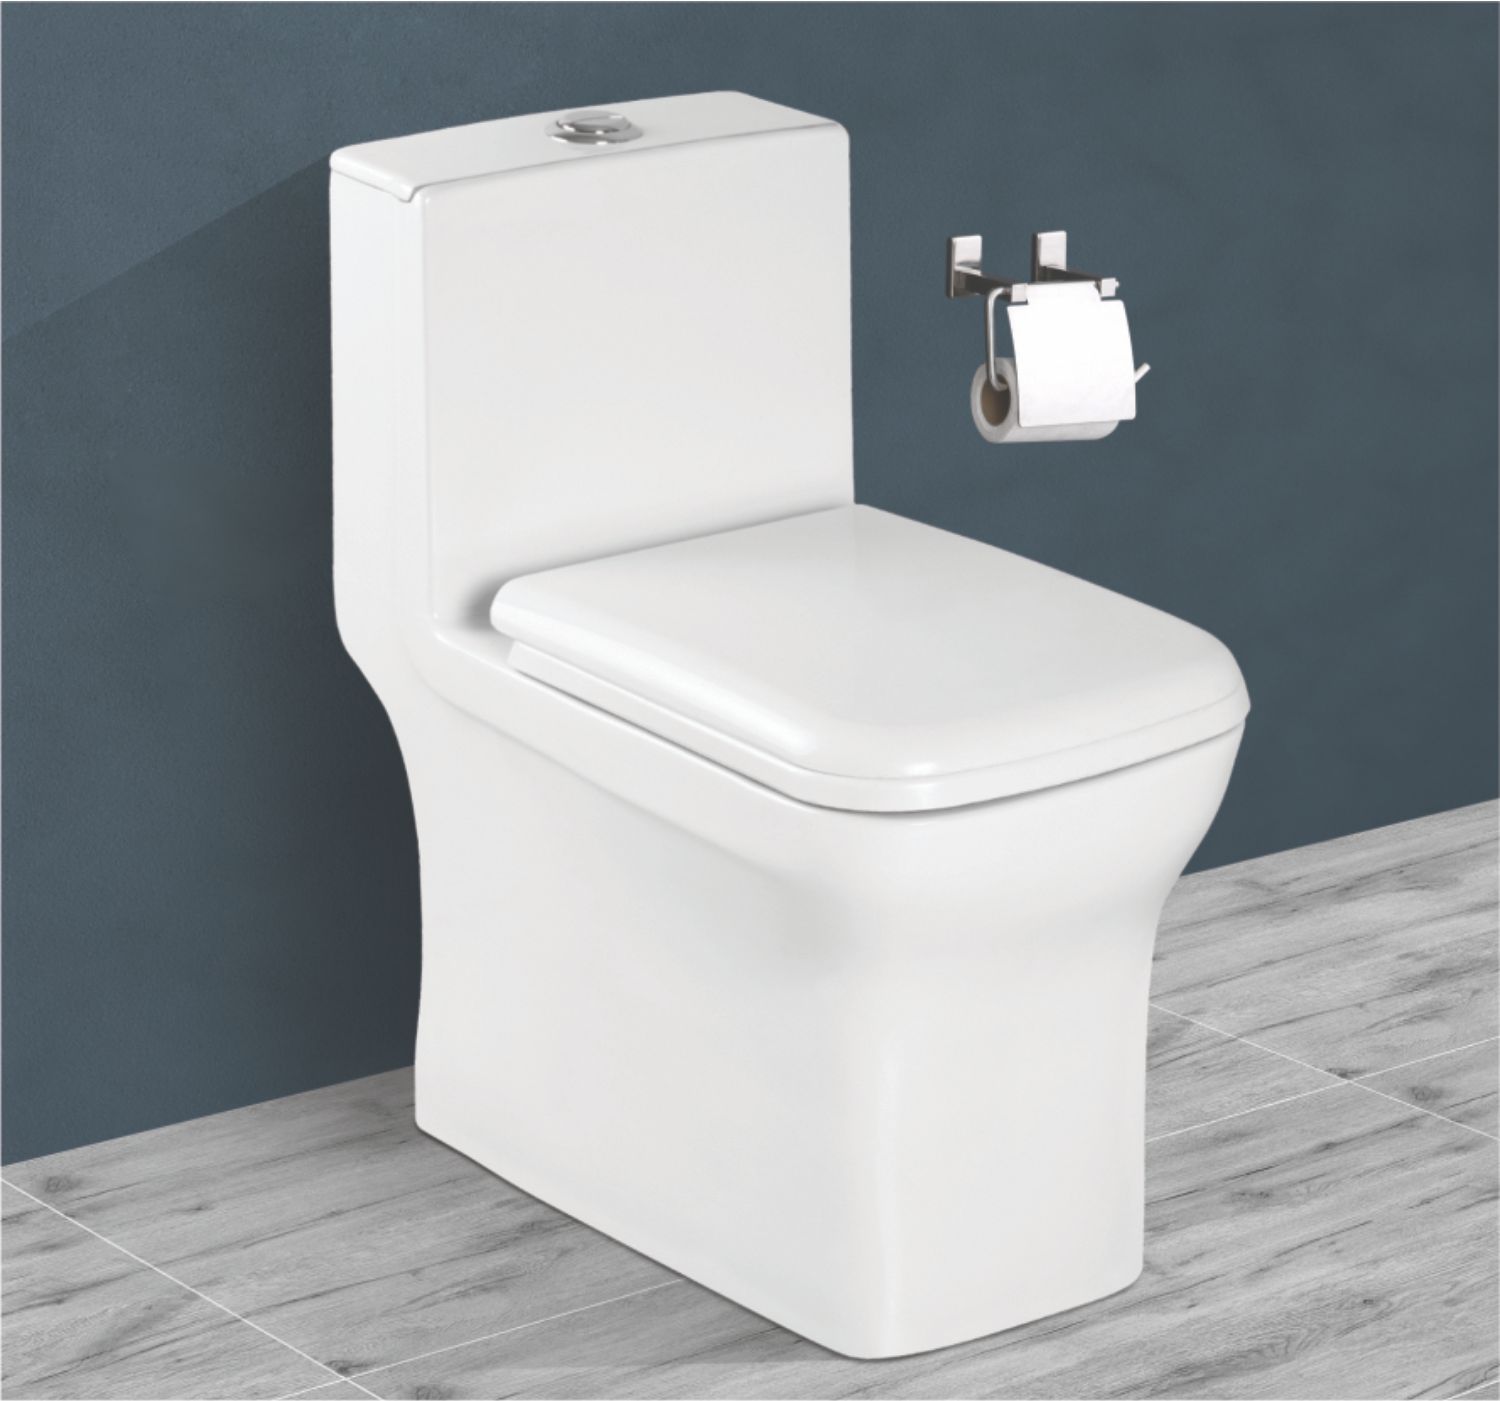 Water Closet Manufacturers and Suppliers